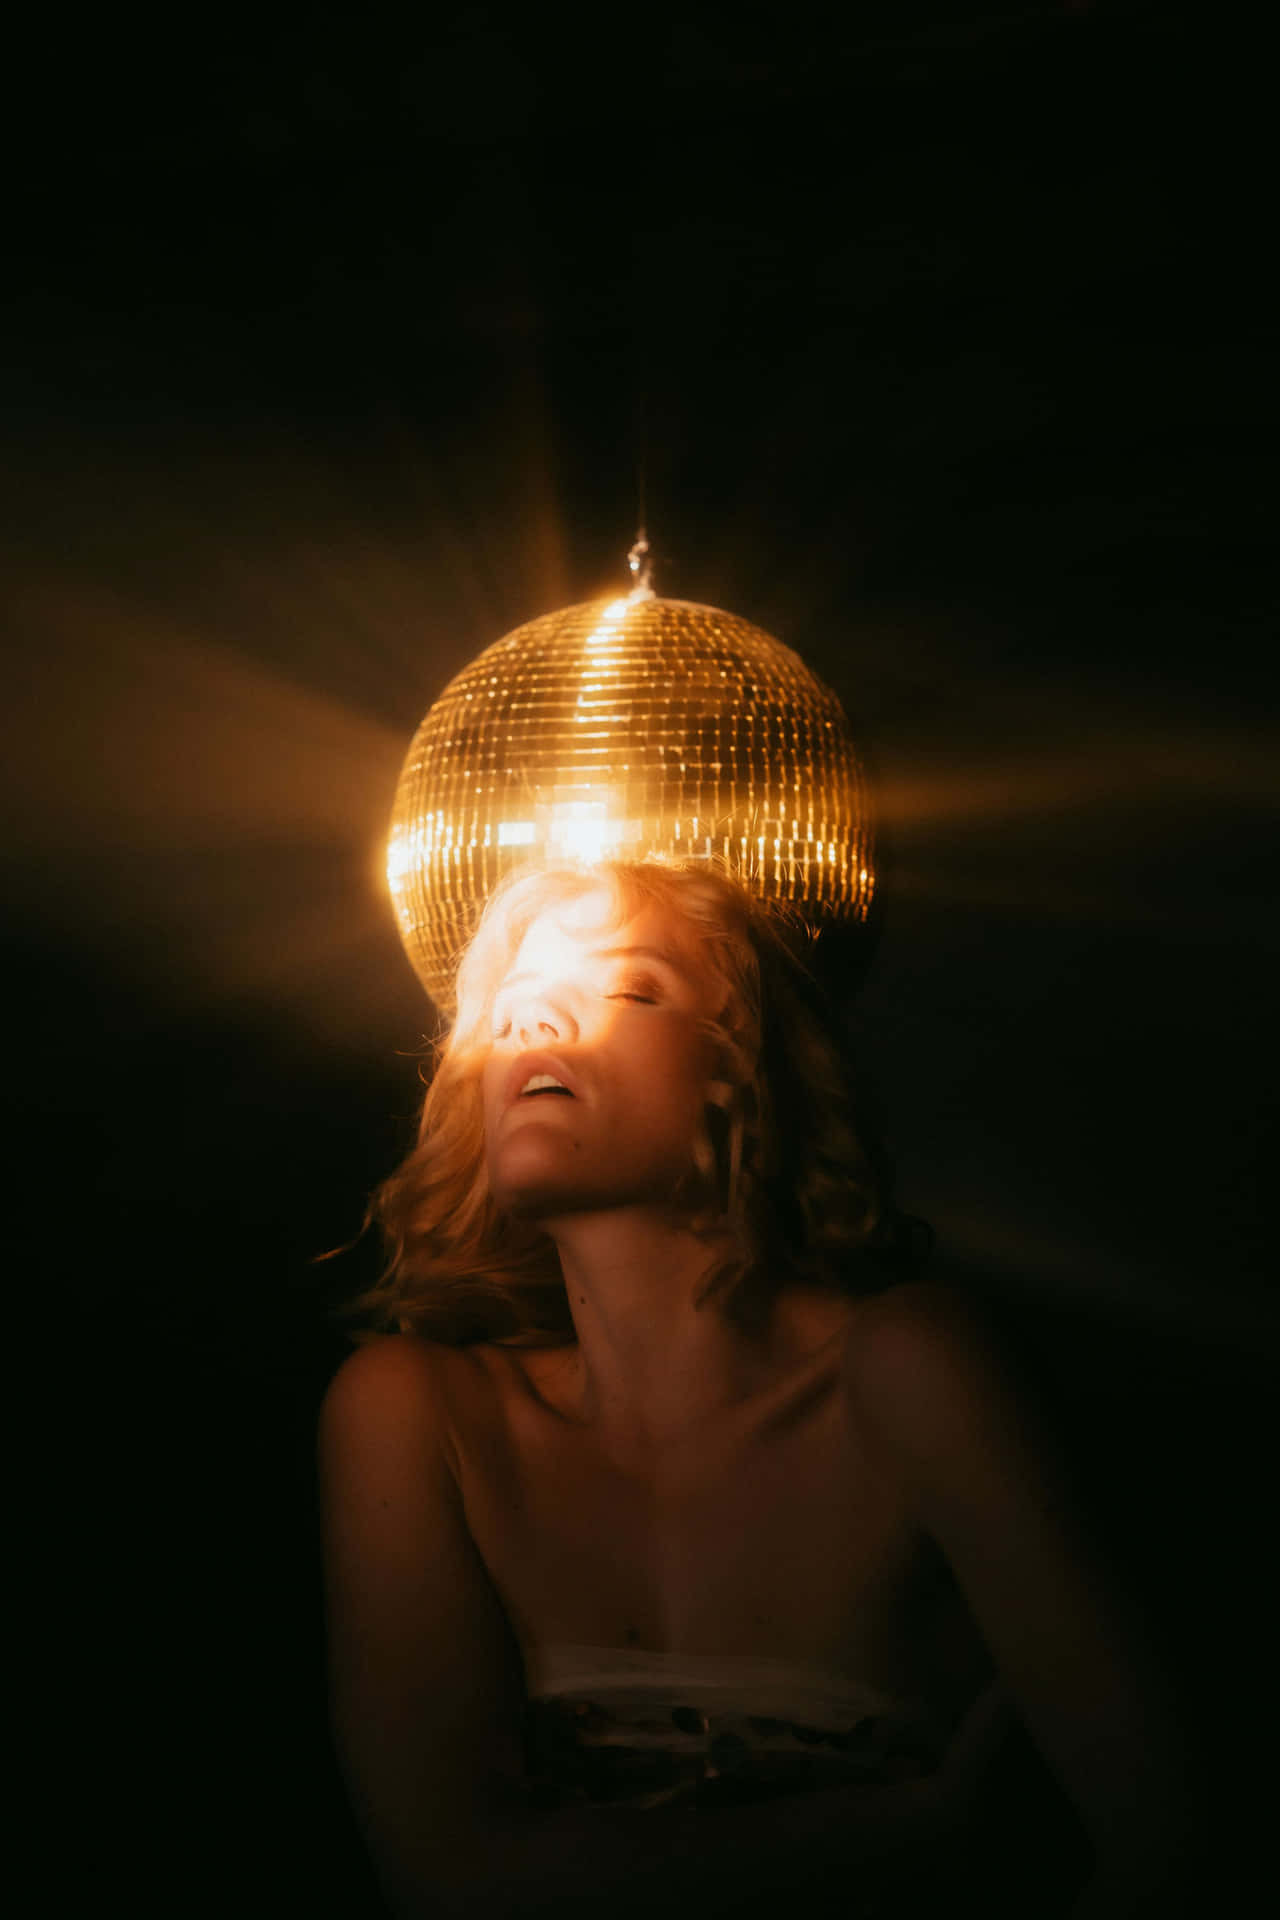 Disco Inspired Portraitwith Mirror Ball Hat Background